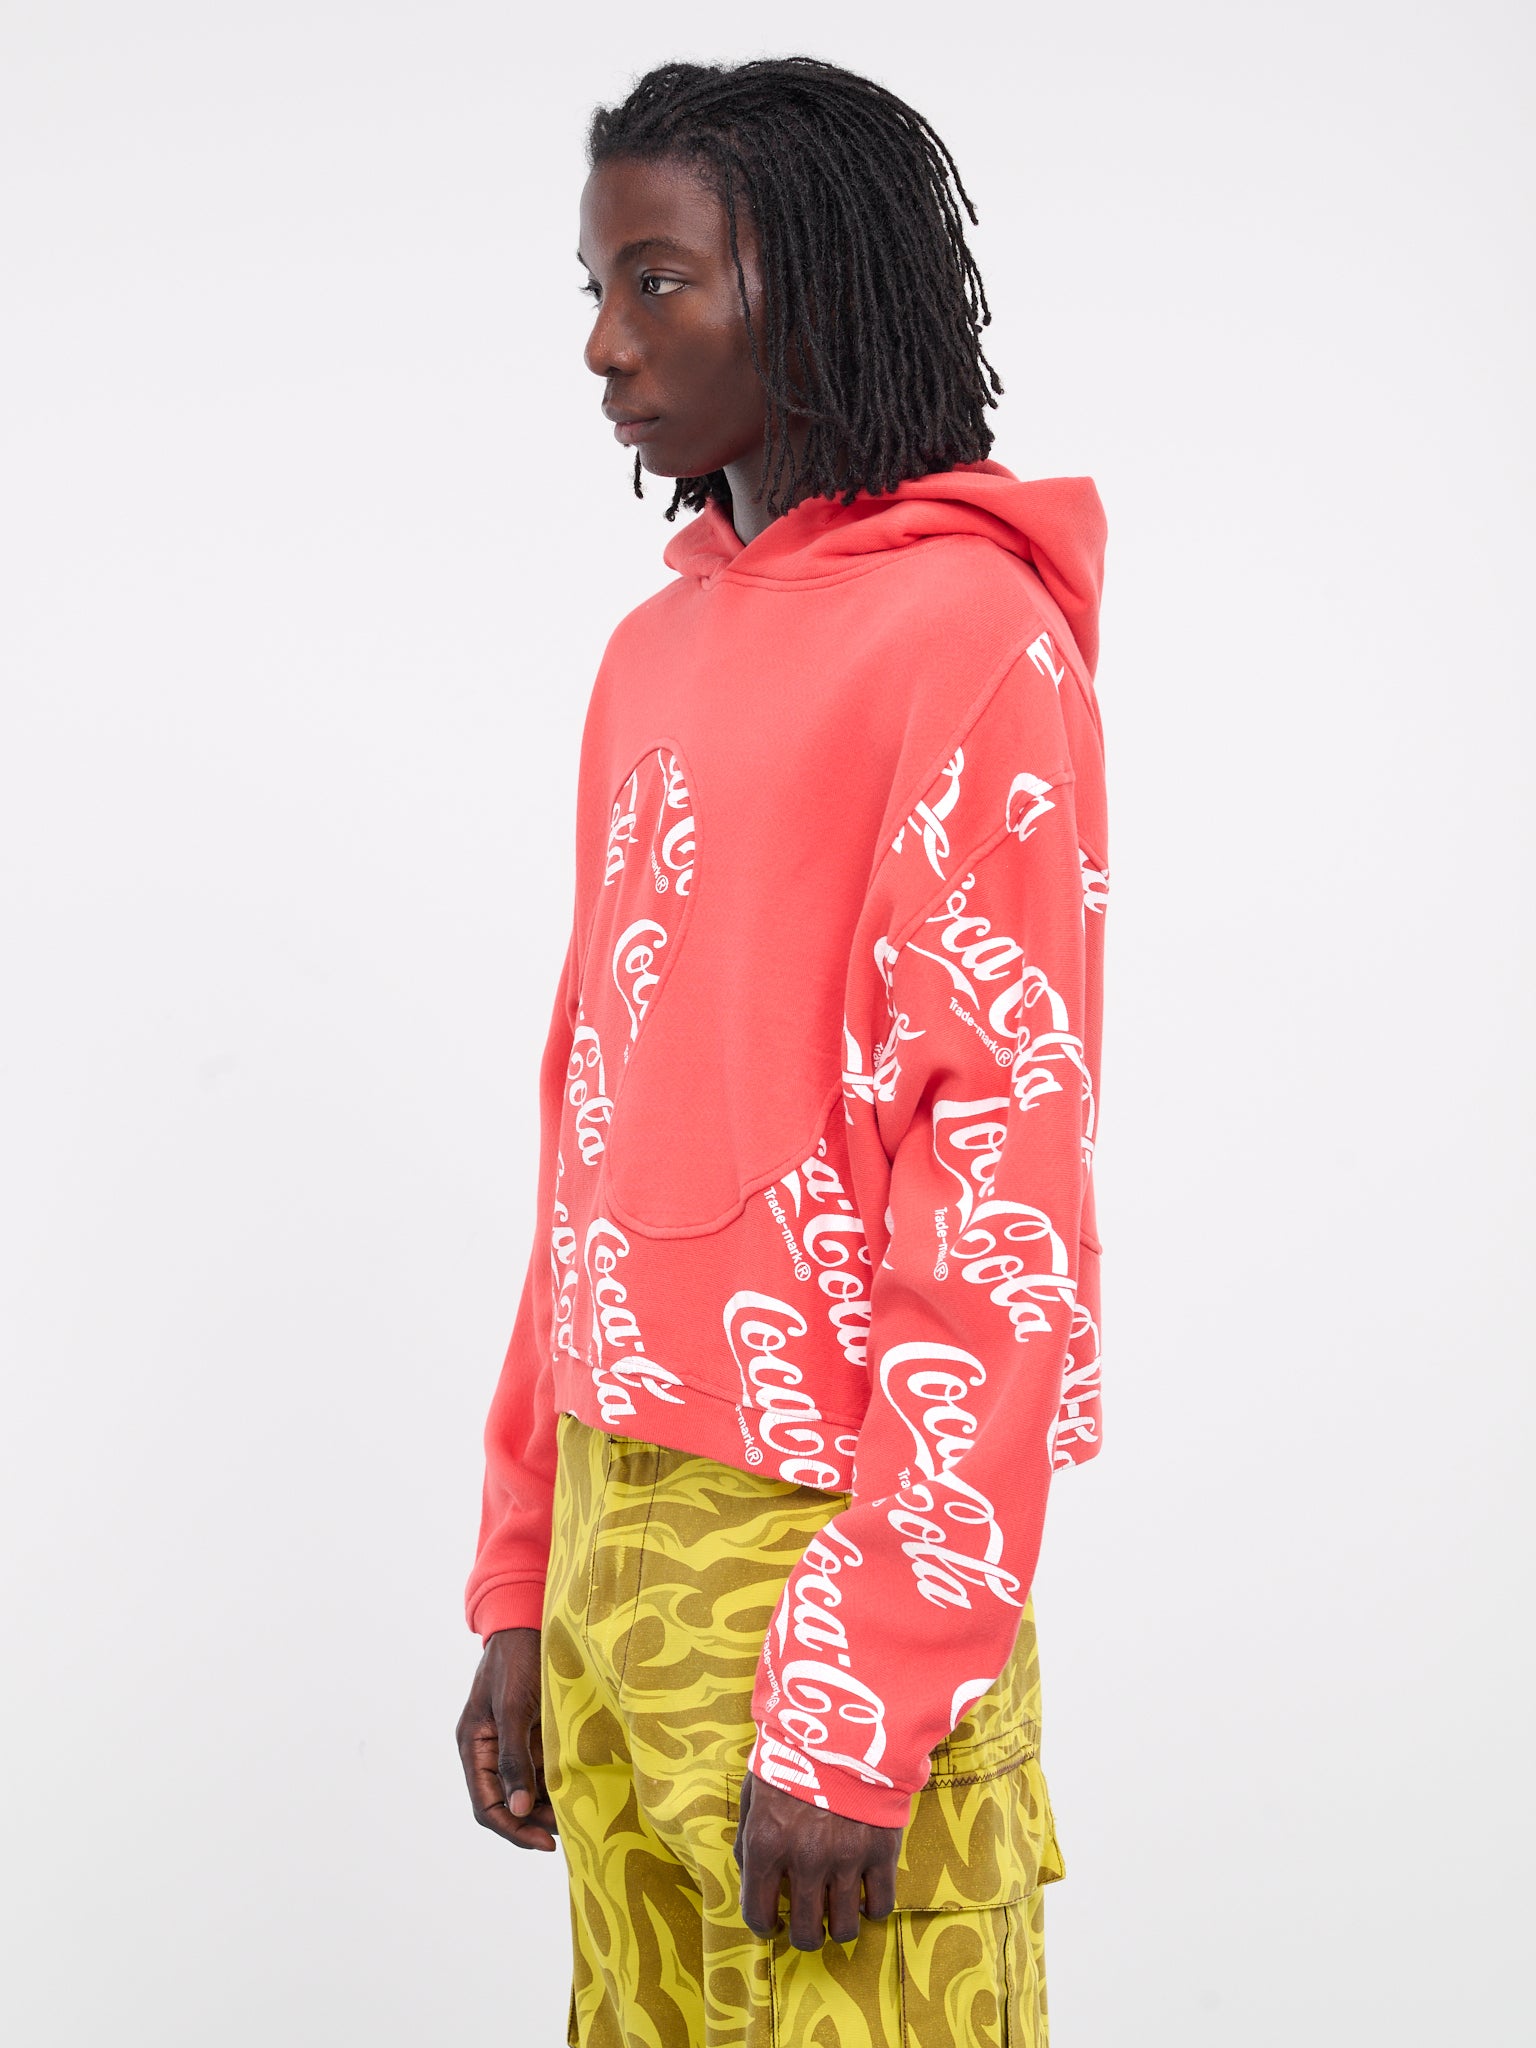 Coca-Cola Swirl Hoodie (ERL08T024-RED)